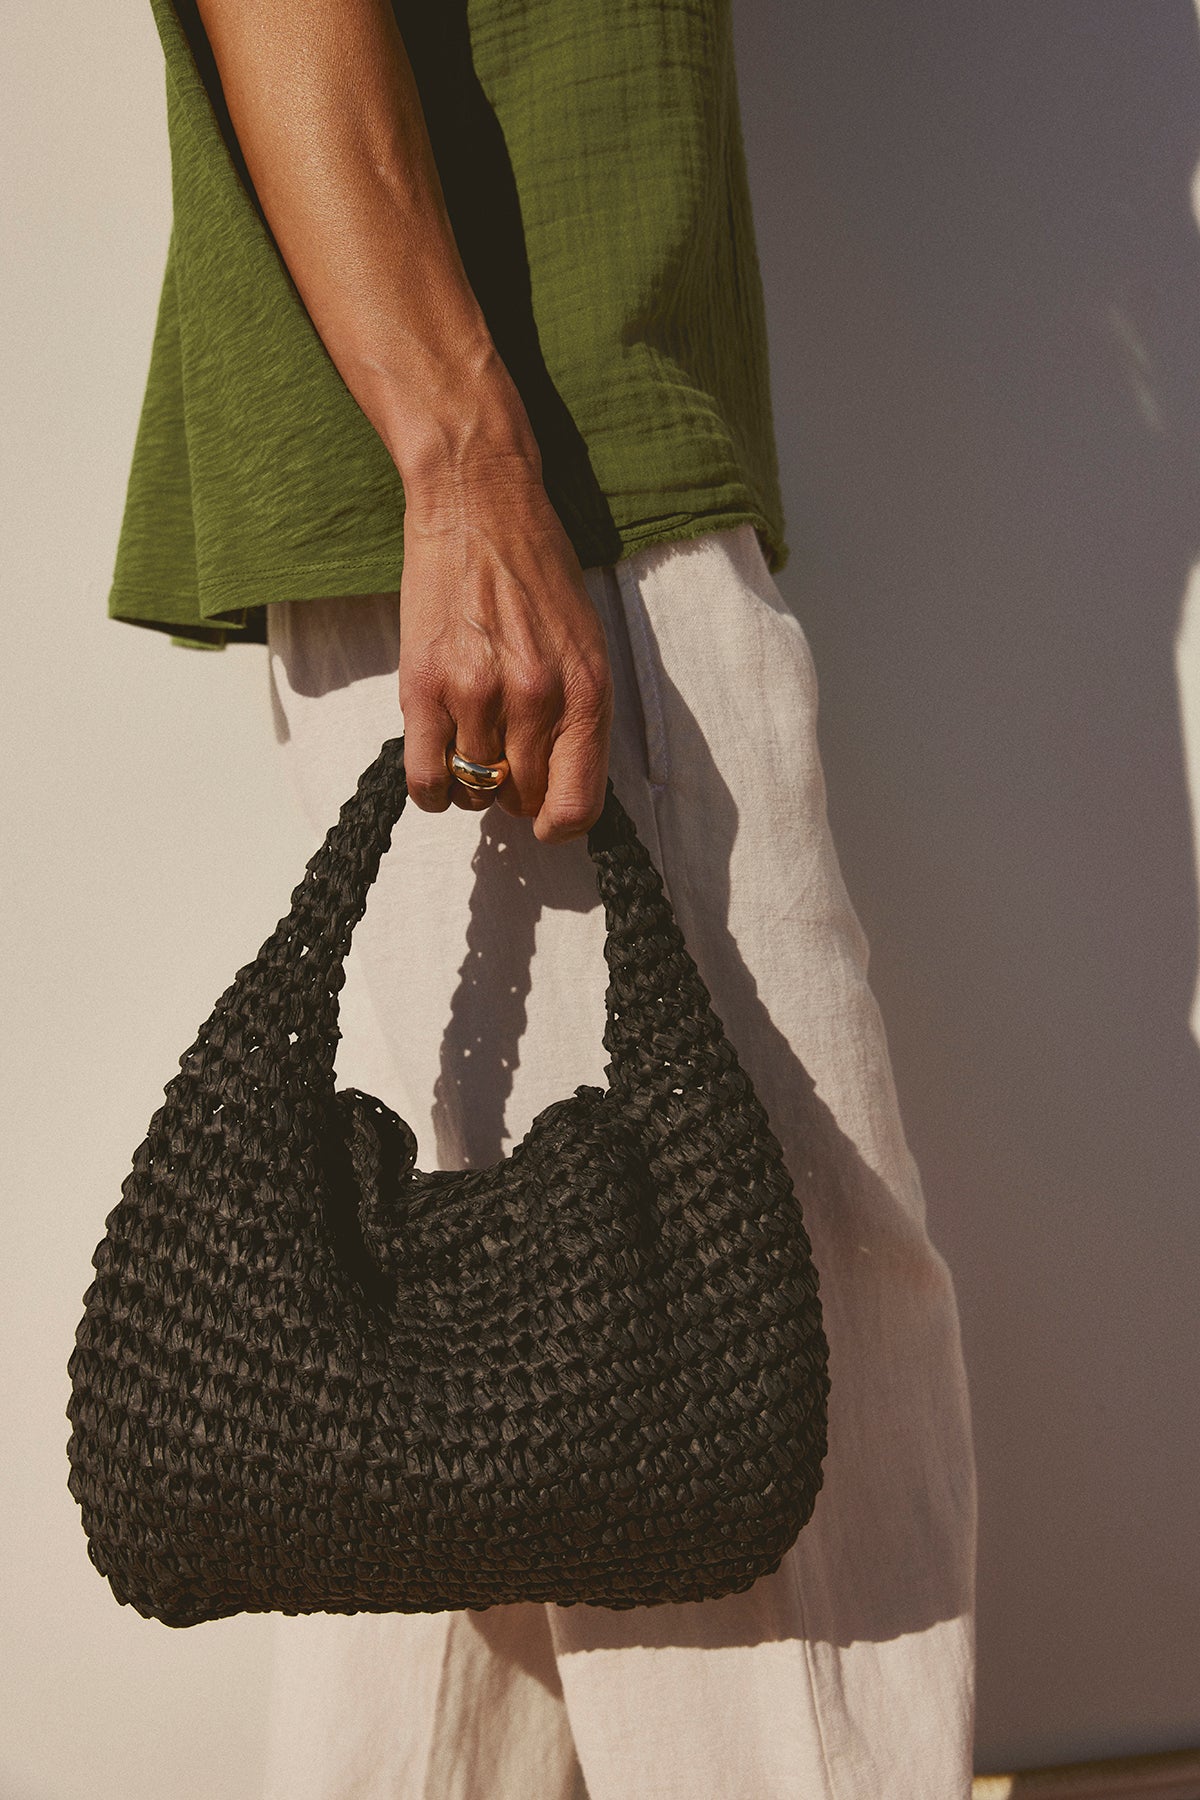 A close-up of a person holding a black Velvet by Graham & Spencer Slouch Bag, wearing a green top and white pants, with a focus on their hand and the bag.-36443809513665